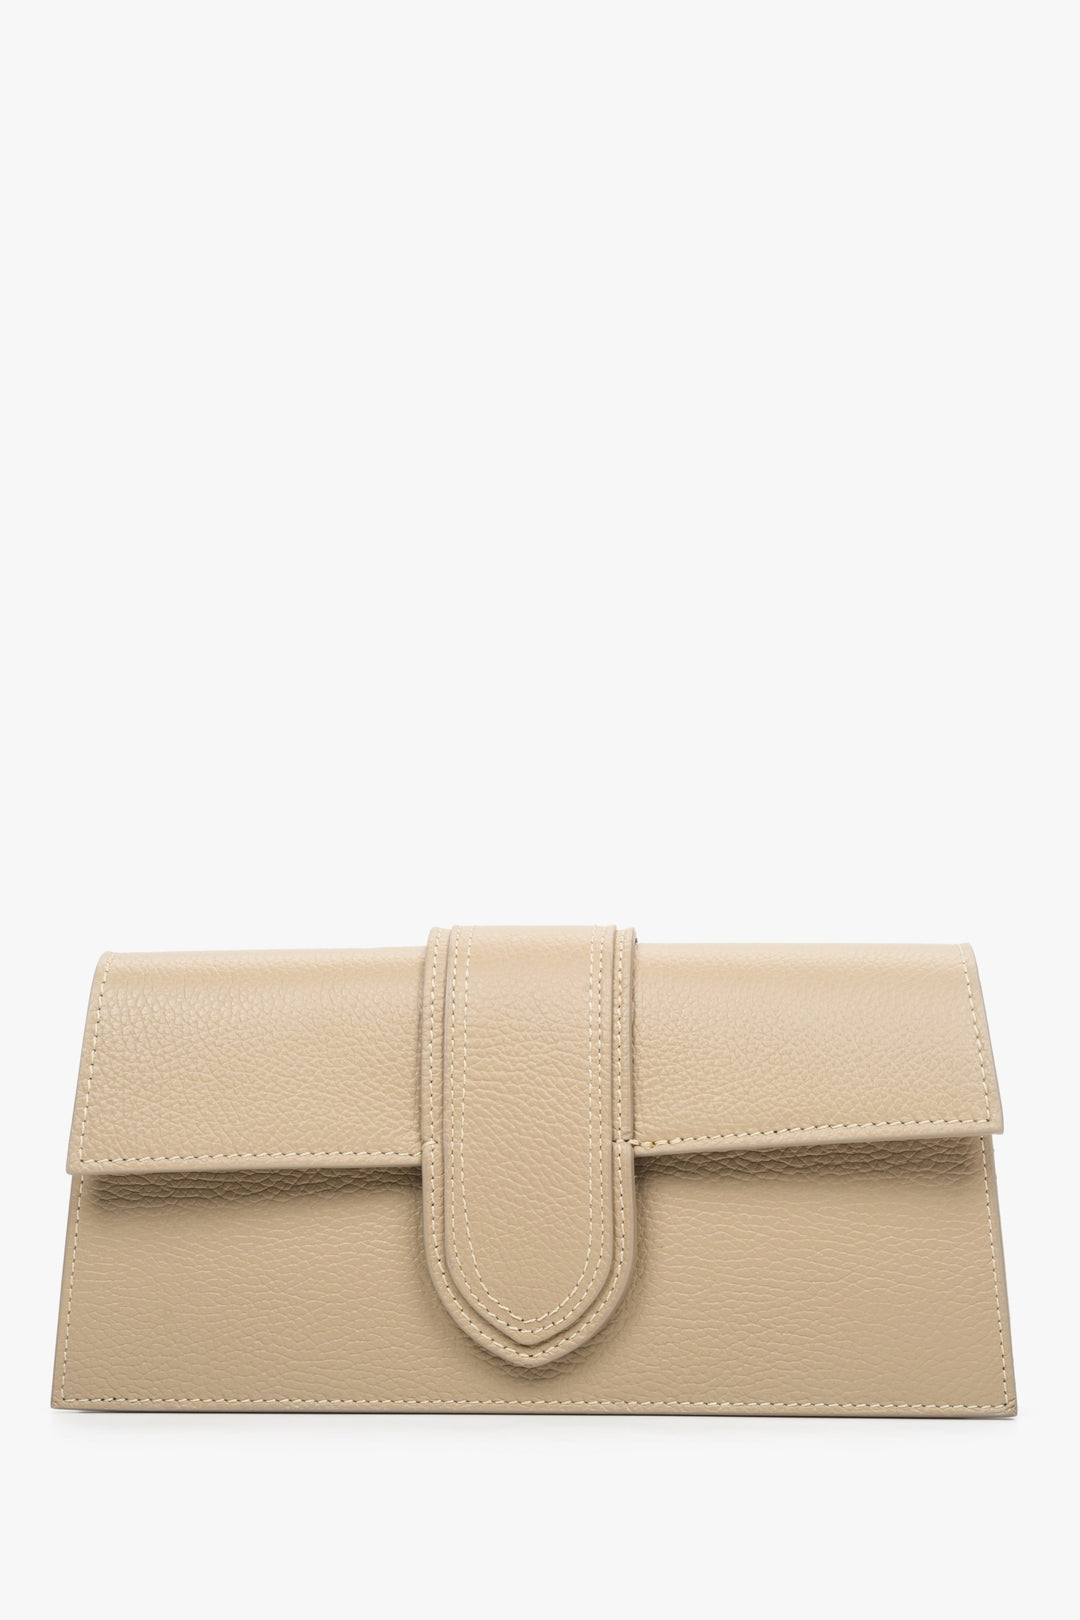 Women's leather handbag in sand beige by Estro - presentation of the model without a strap.